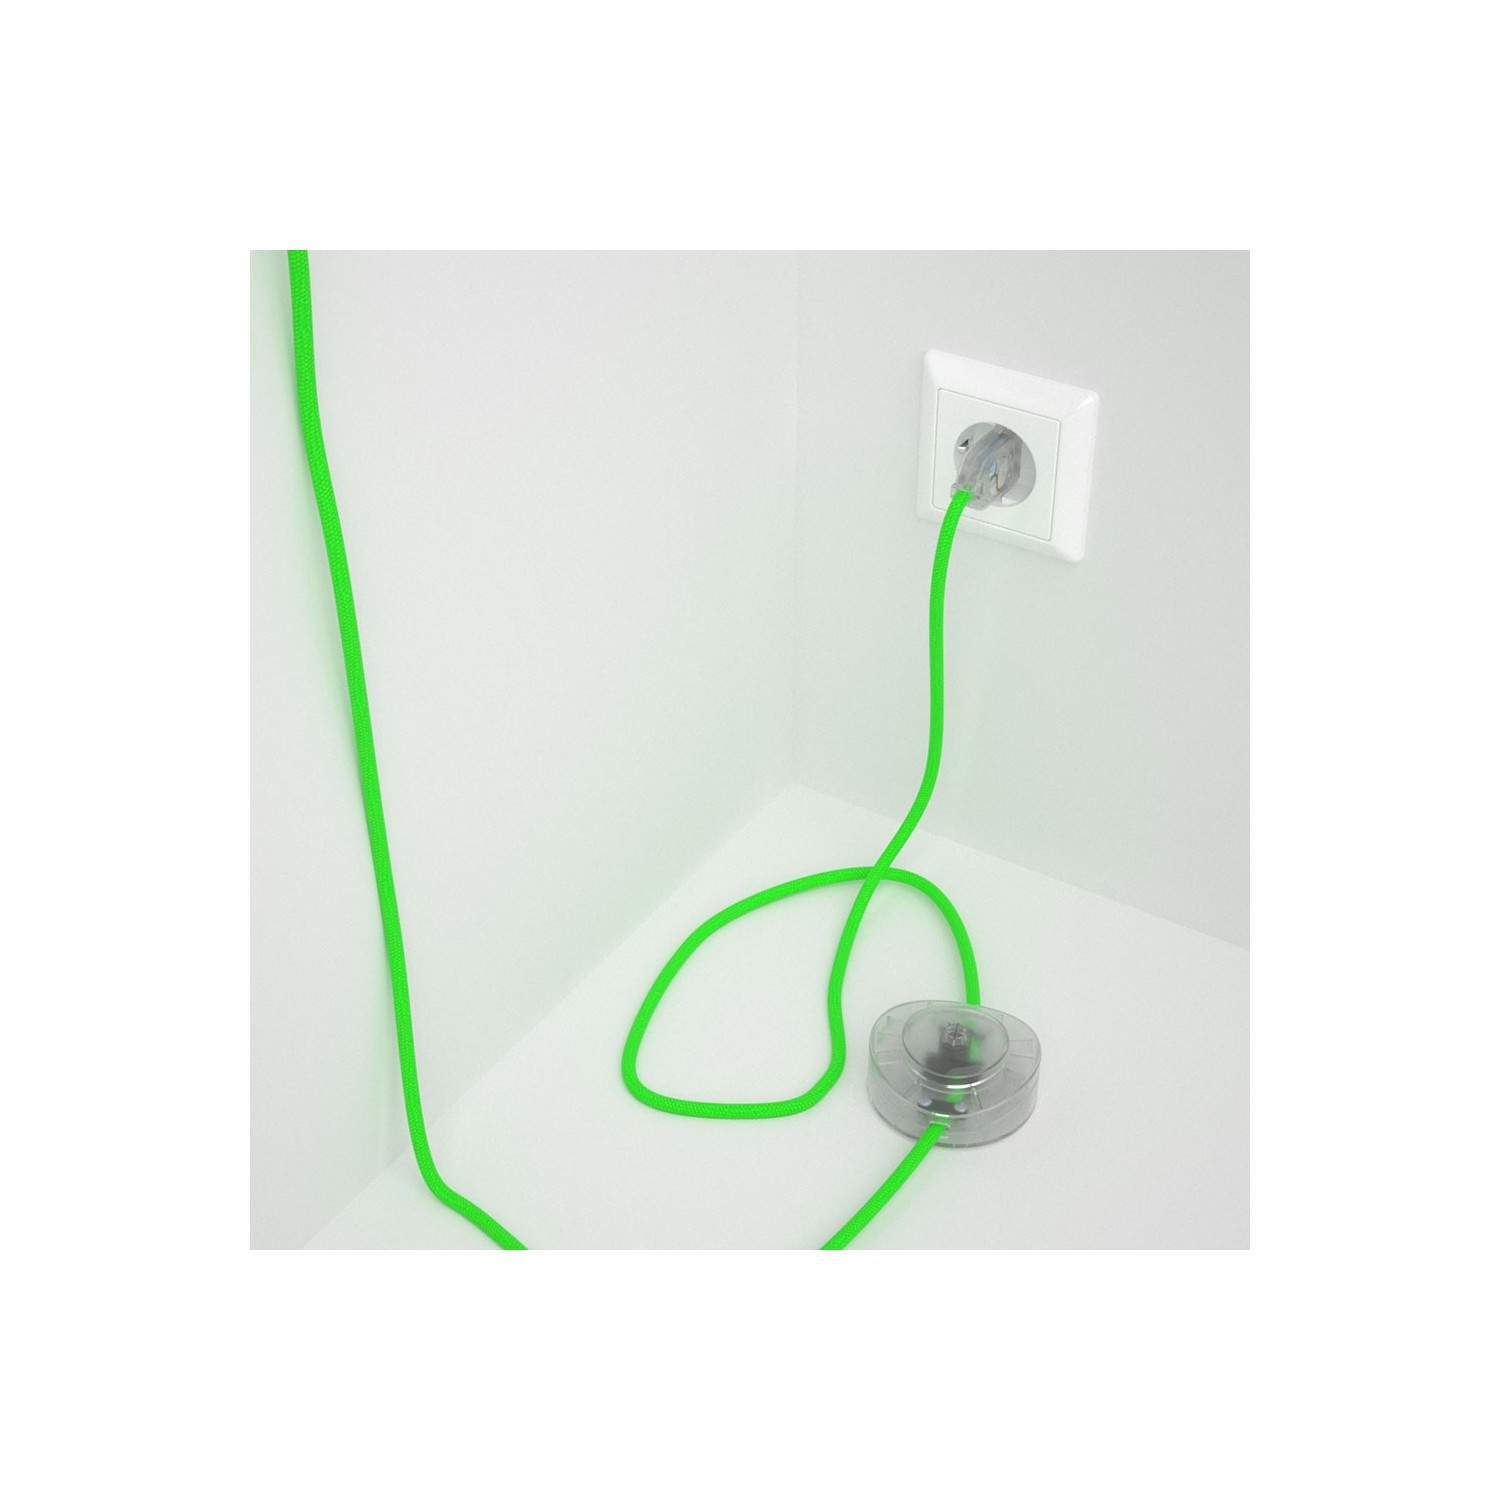 Wiring Pedestal, RF06 Neon Green Rayon 3 m. Choose the colour of the switch and plug.